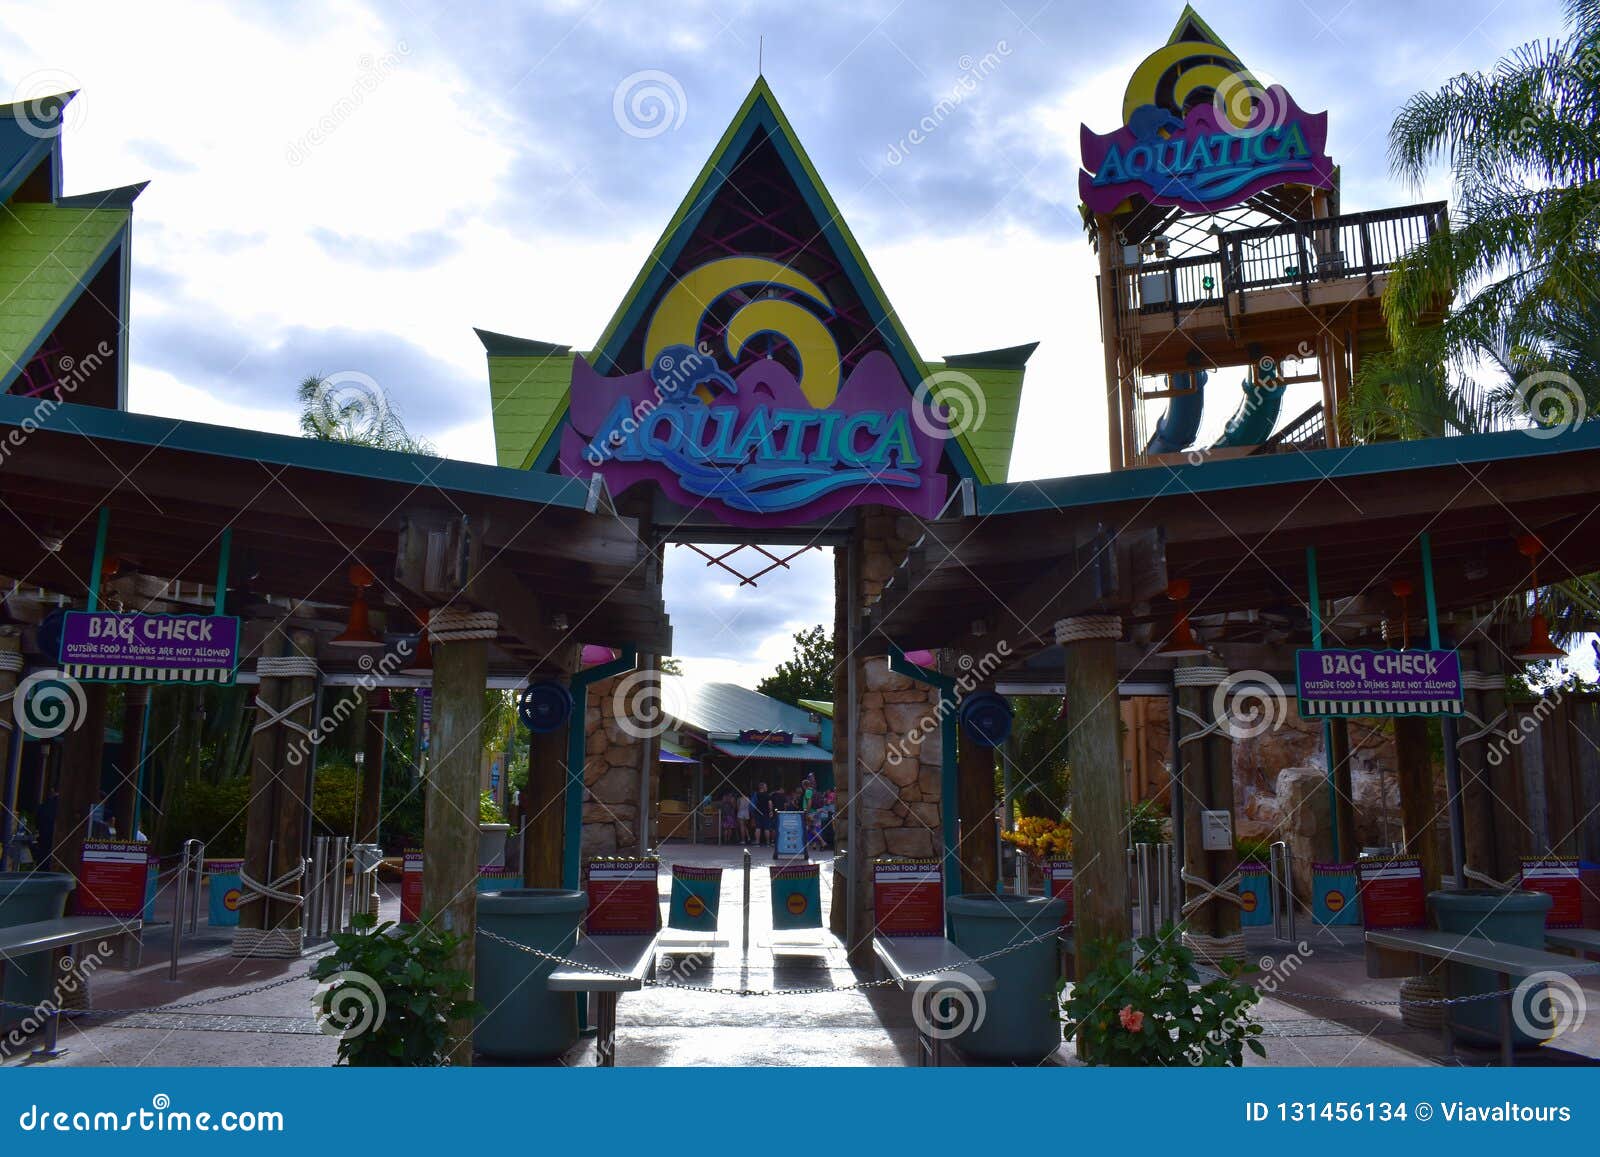 Aquatica Main Entrance And Security Control In International Drive Area Editorial Stock Image Image Of Activities Drive